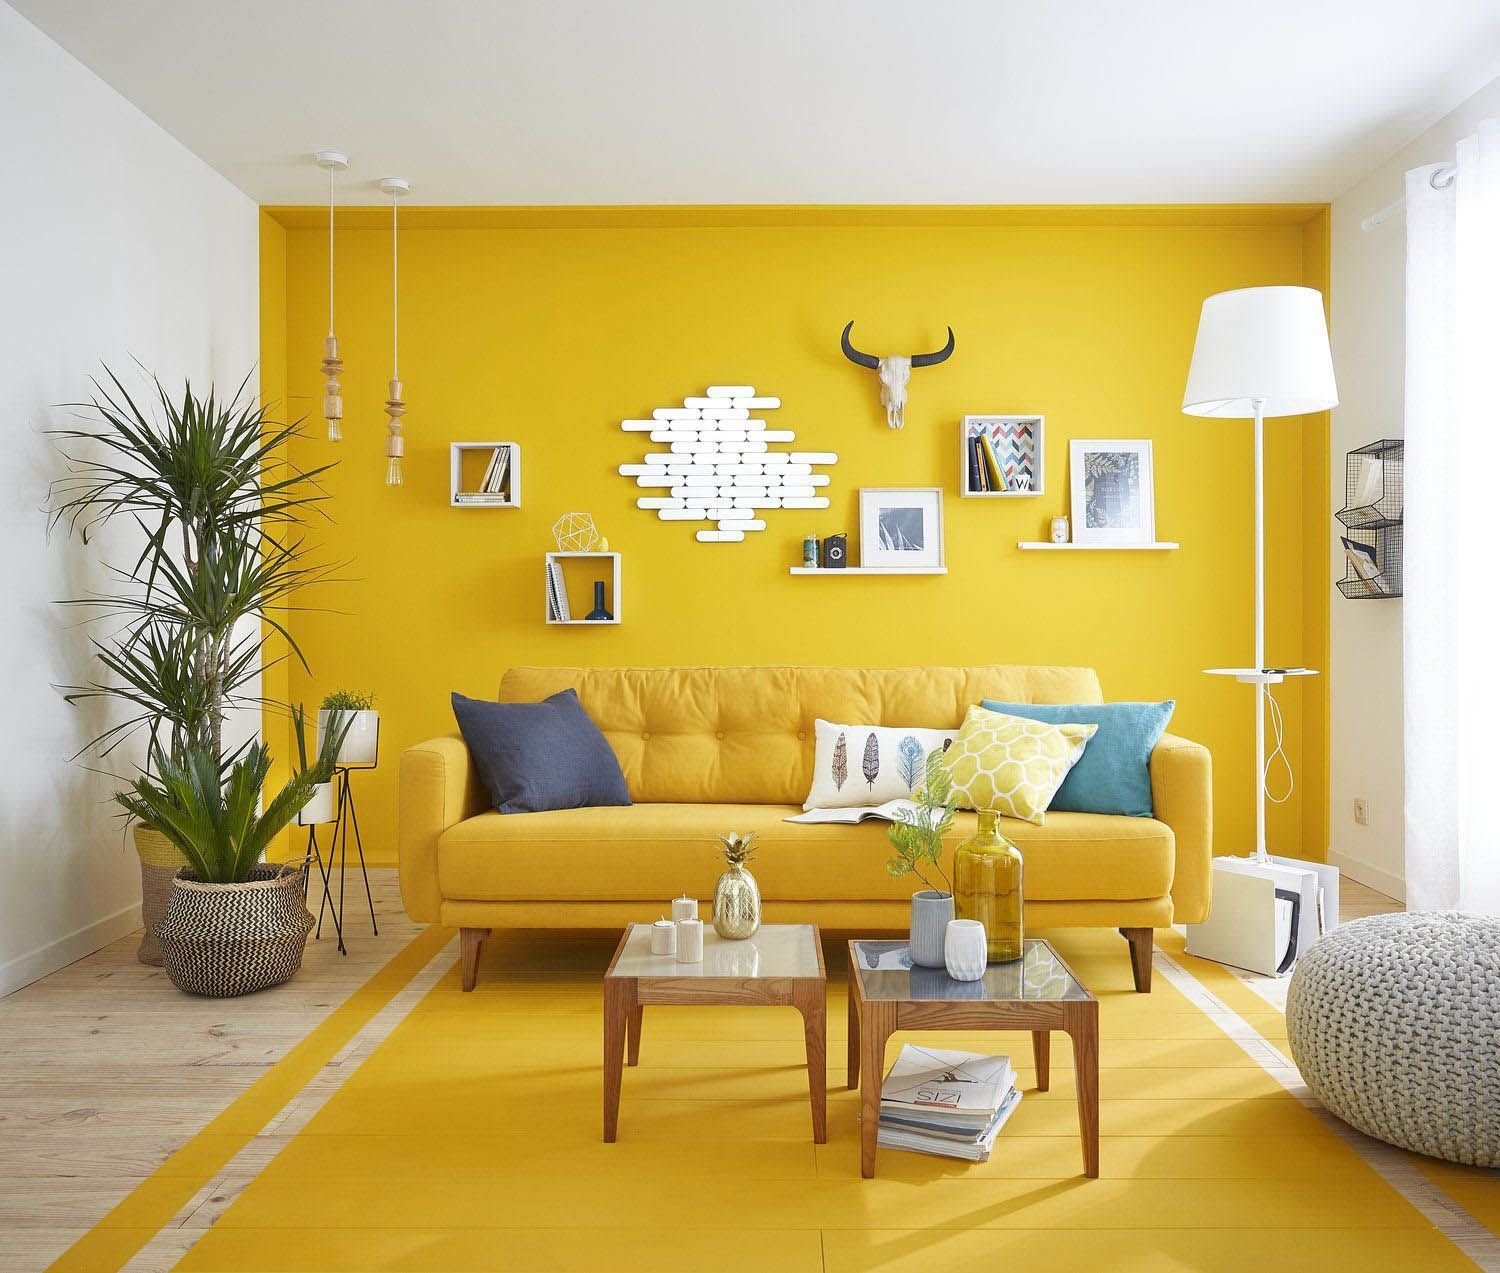 Decorating With Yellow: 20 Ways To Use This Sunshine Shade